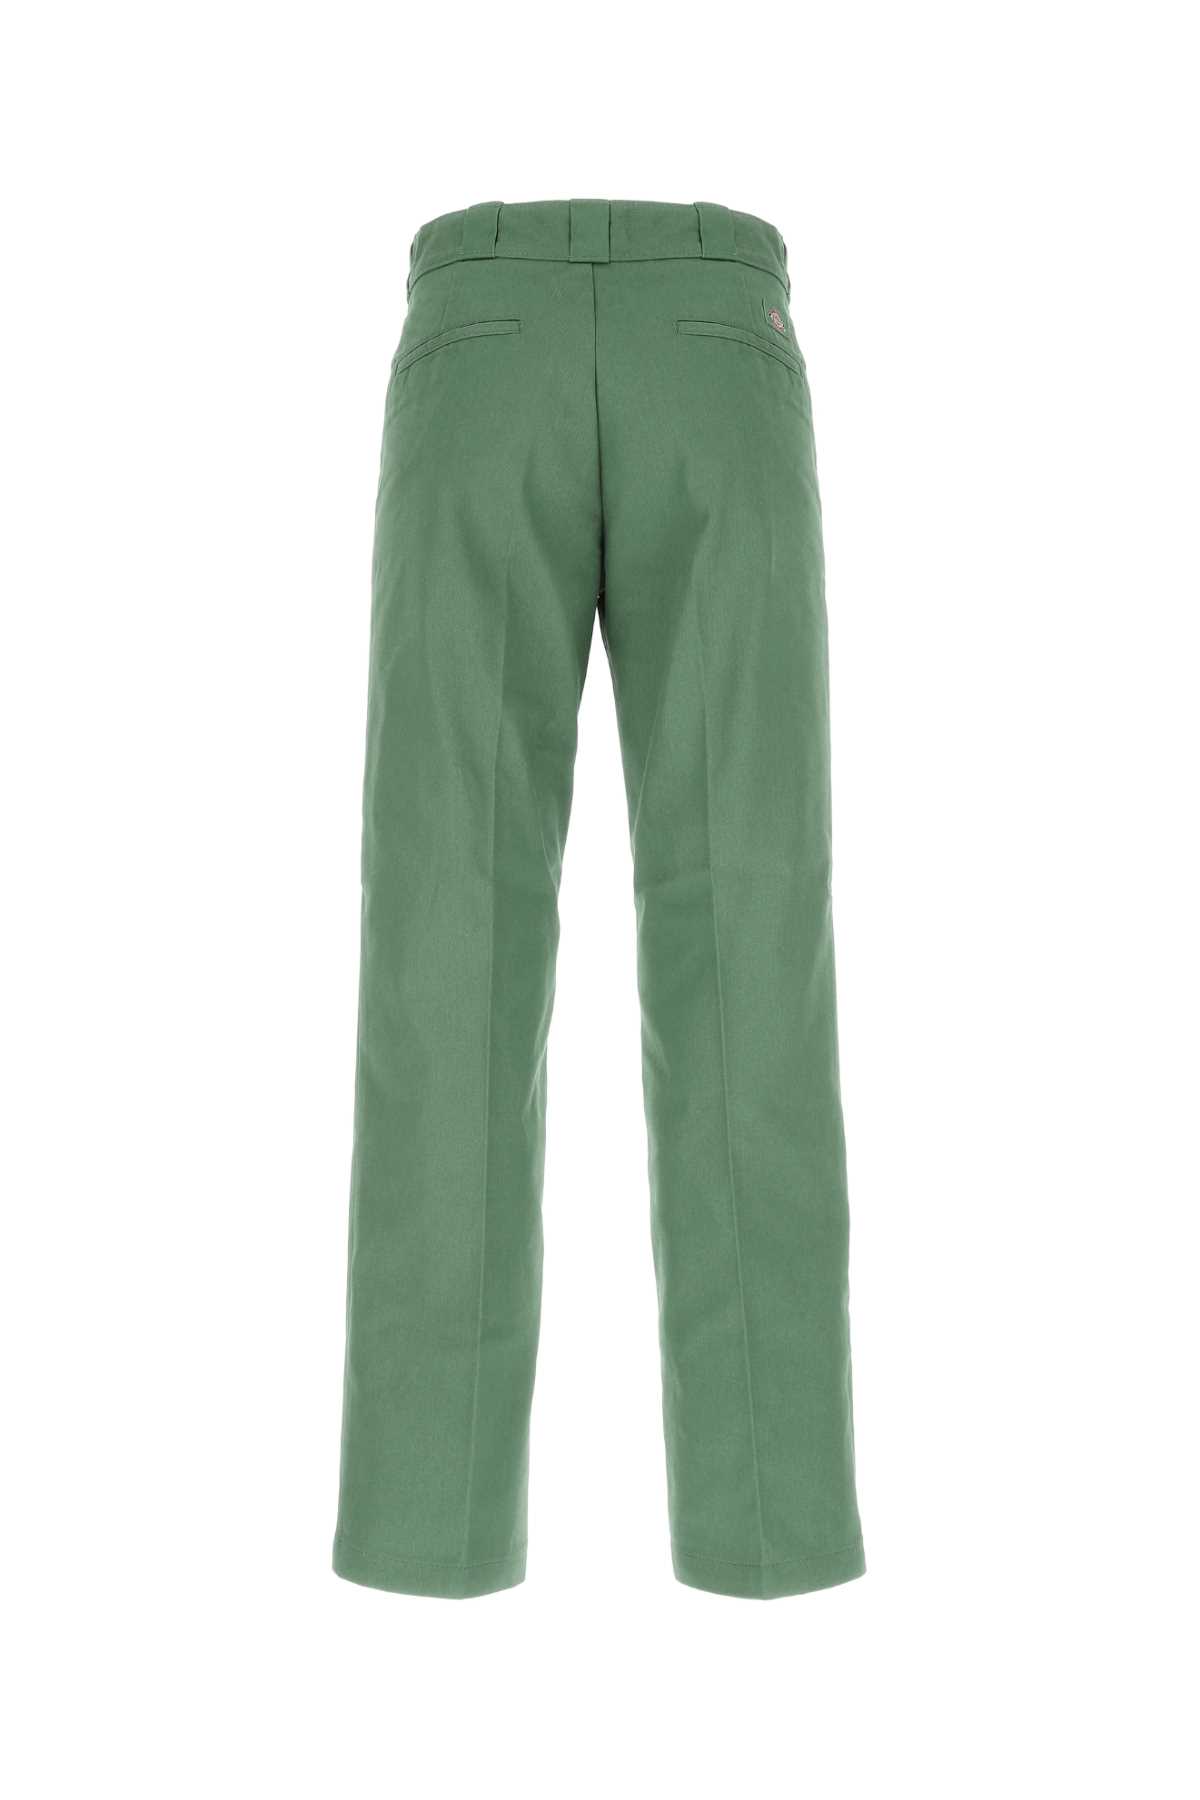 Dickies Green Polyester Blend Pant In C971